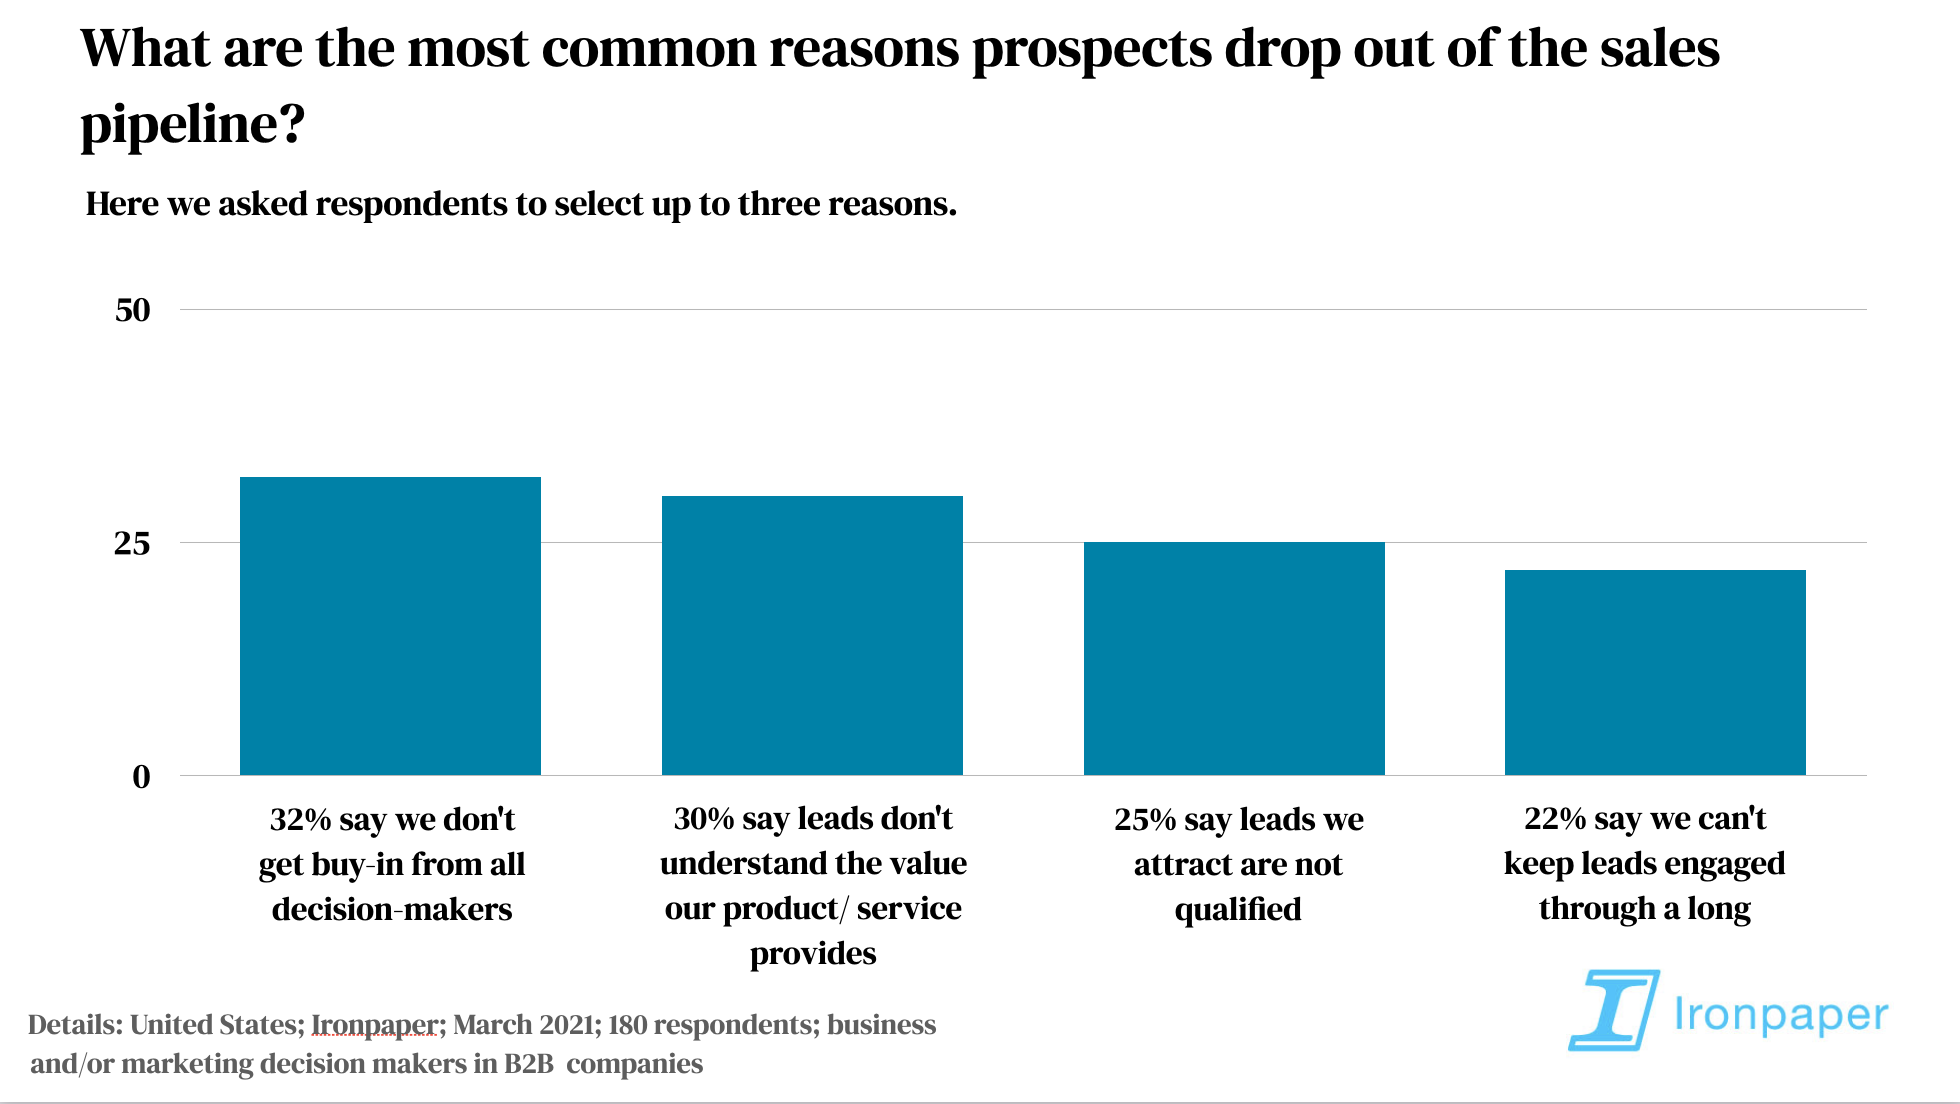 B2B research survey results: What are the most common reasons prospects drop out of the sales pipeline?